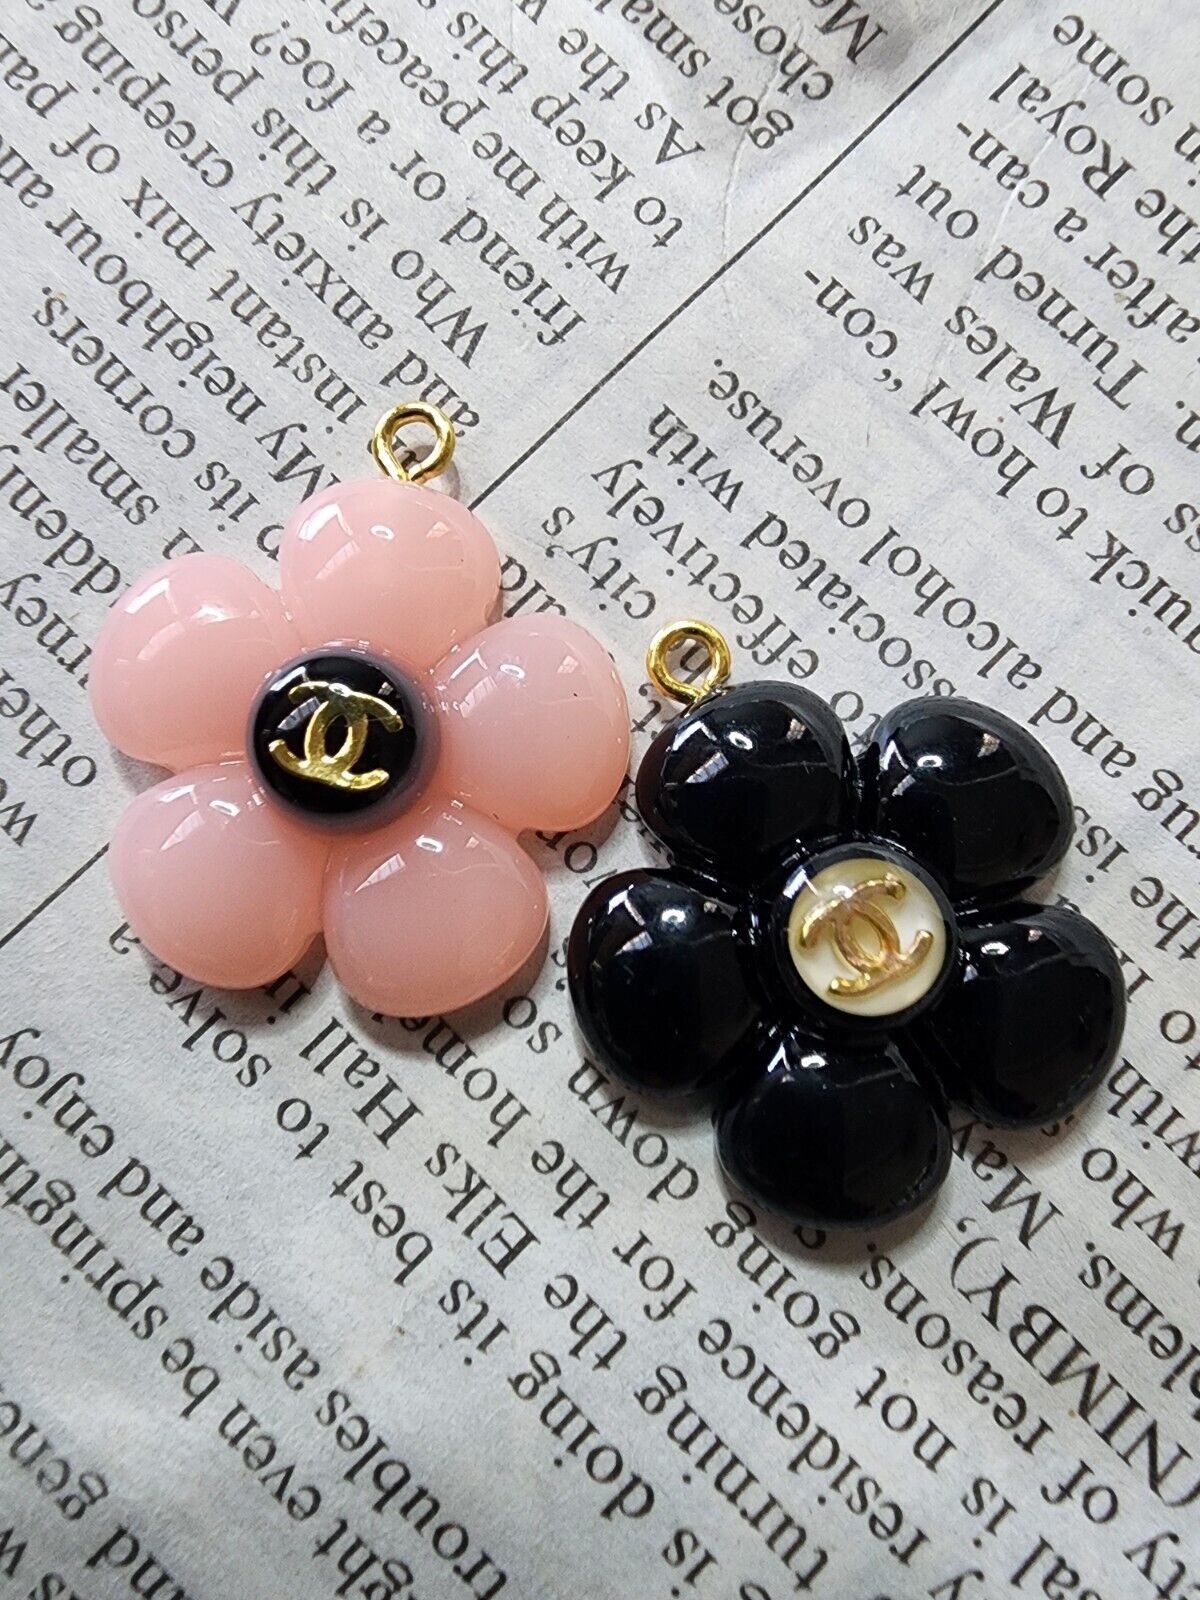 2 pcs Chanel buttons resin Flower Black Pink 25 mm